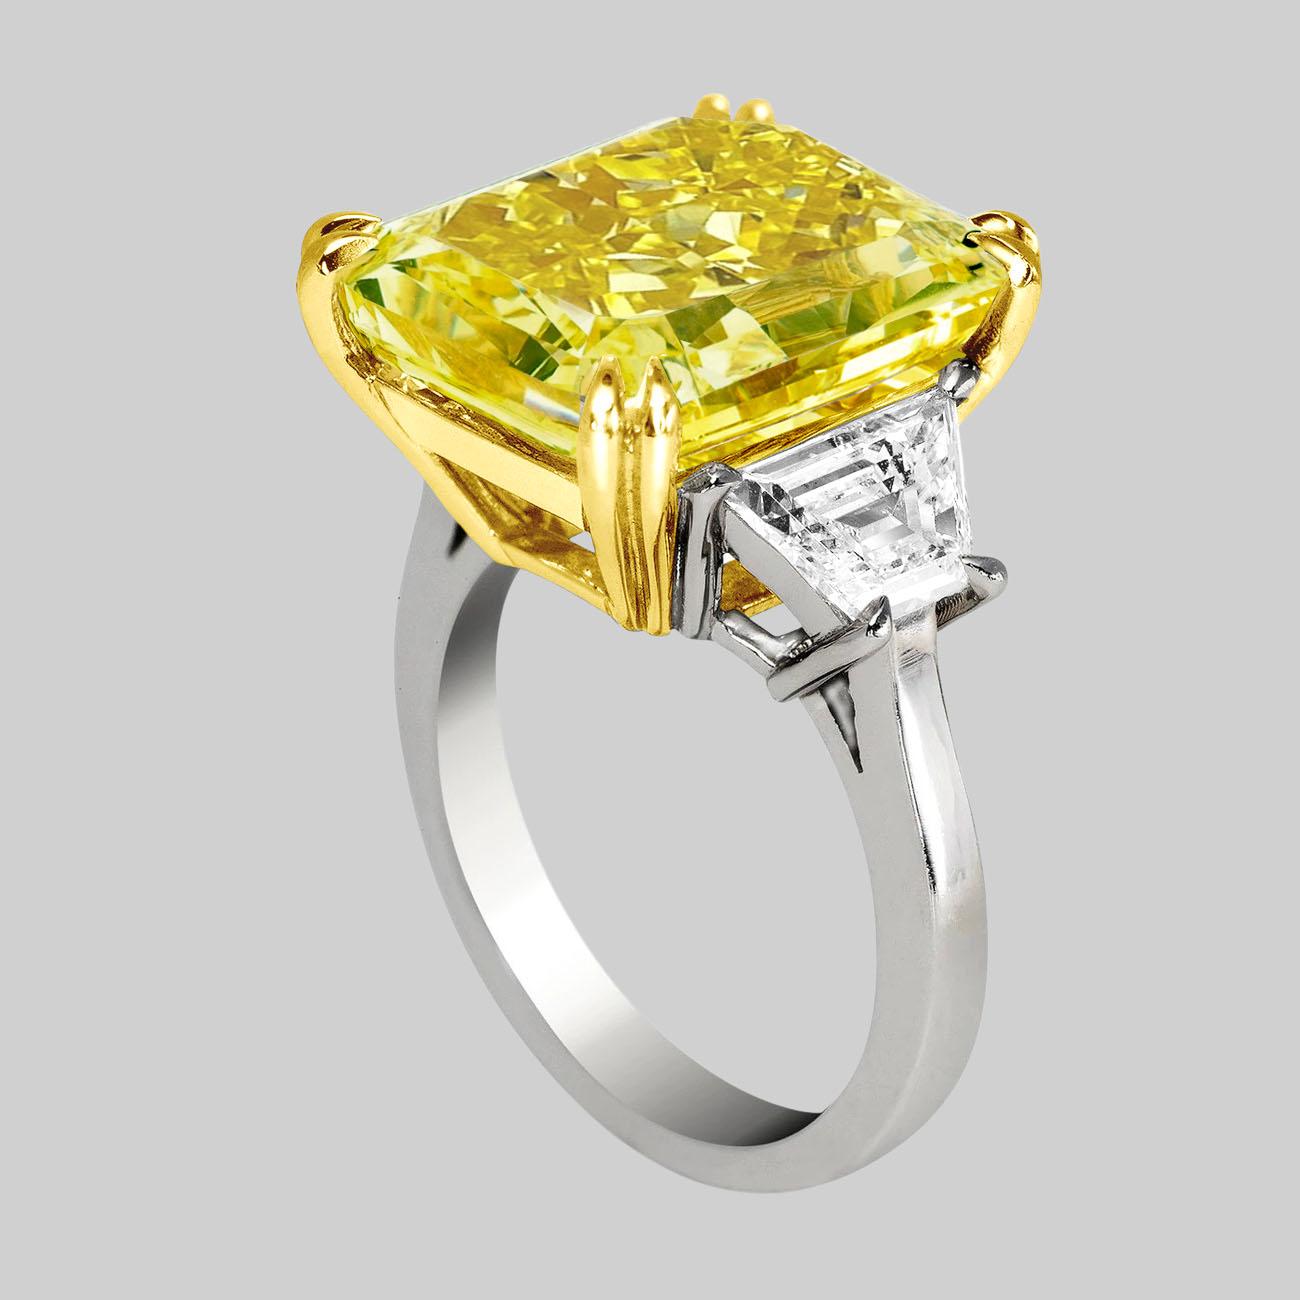 This beautiful statement ring features a 23 carat Fancy VIVID Yellow Brilliant  Cushion Cut Diamond flanked with trapezoid cut white diamonds 

See pictures for details. (see certificate picture for more detailed center stone information)

For this